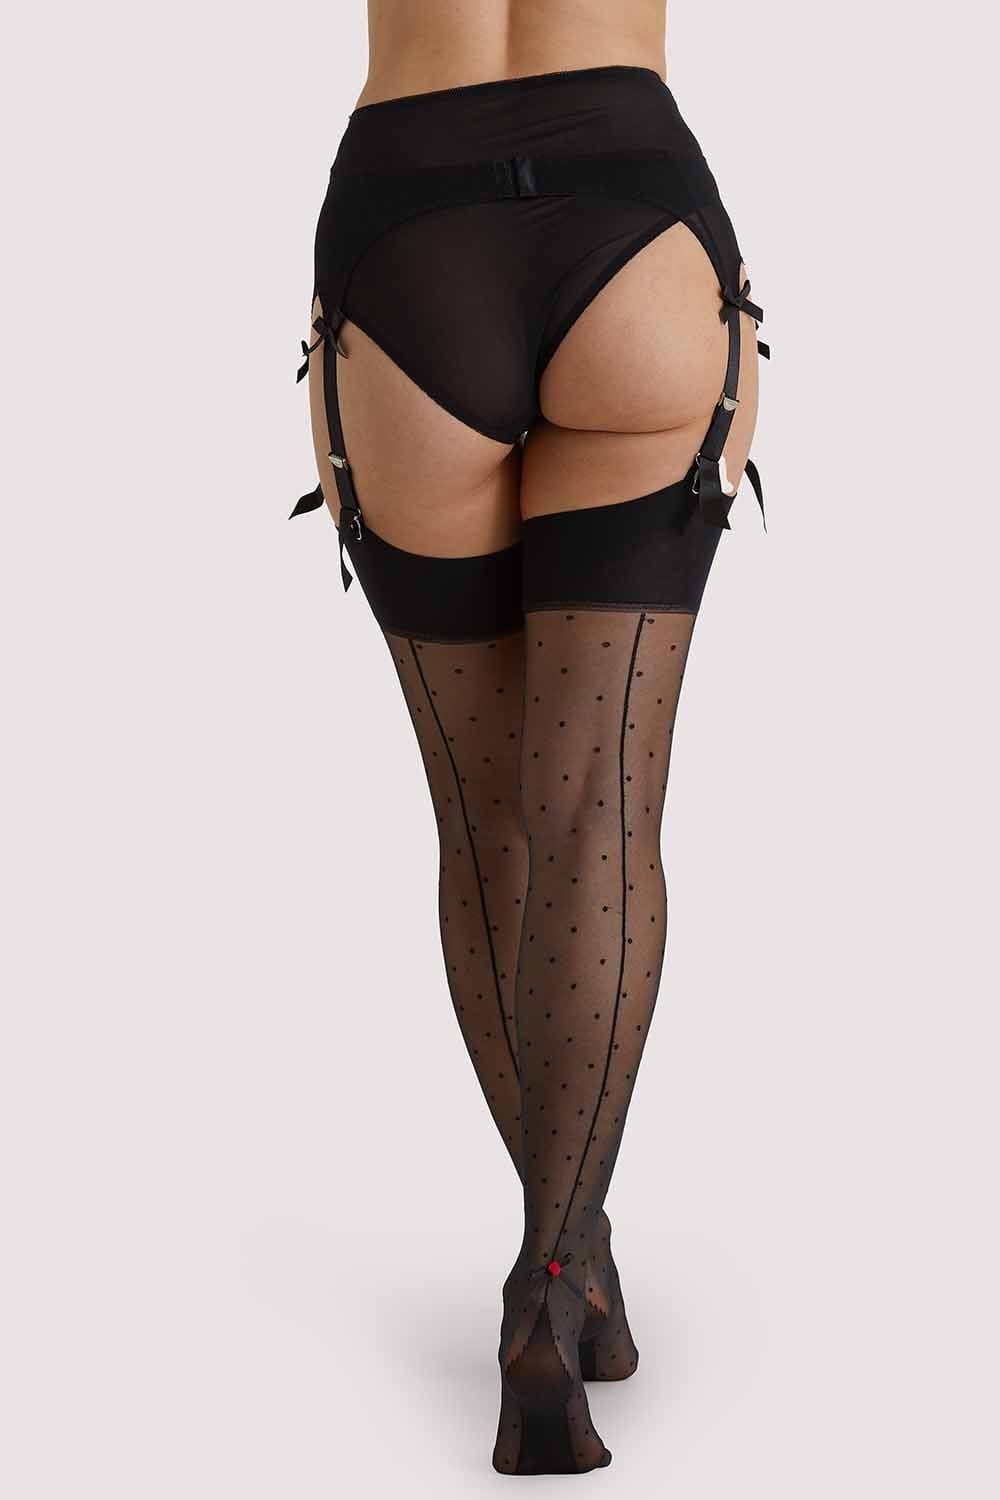 Dotty Seamed Stockings With Bow Black